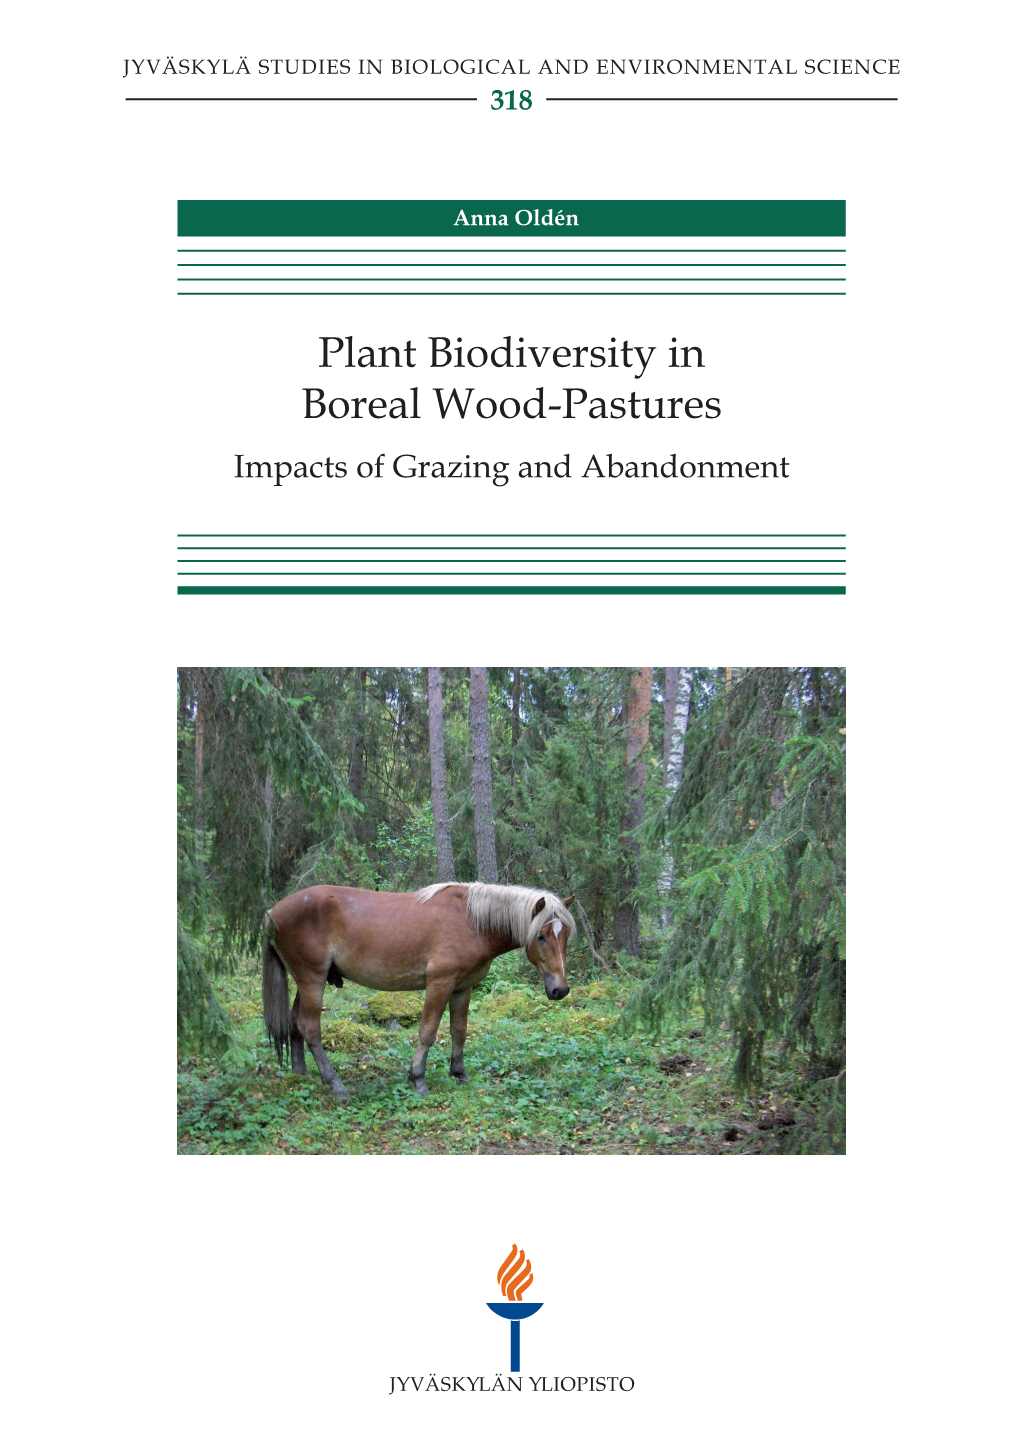 Plant Biodiversity in Boreal Wood-Pastures Impacts of Grazing and Abandonment JYVÄSKYLÄ STUDIES in BIOLOGICAL and ENVIRONMENTAL SCIENCE 318